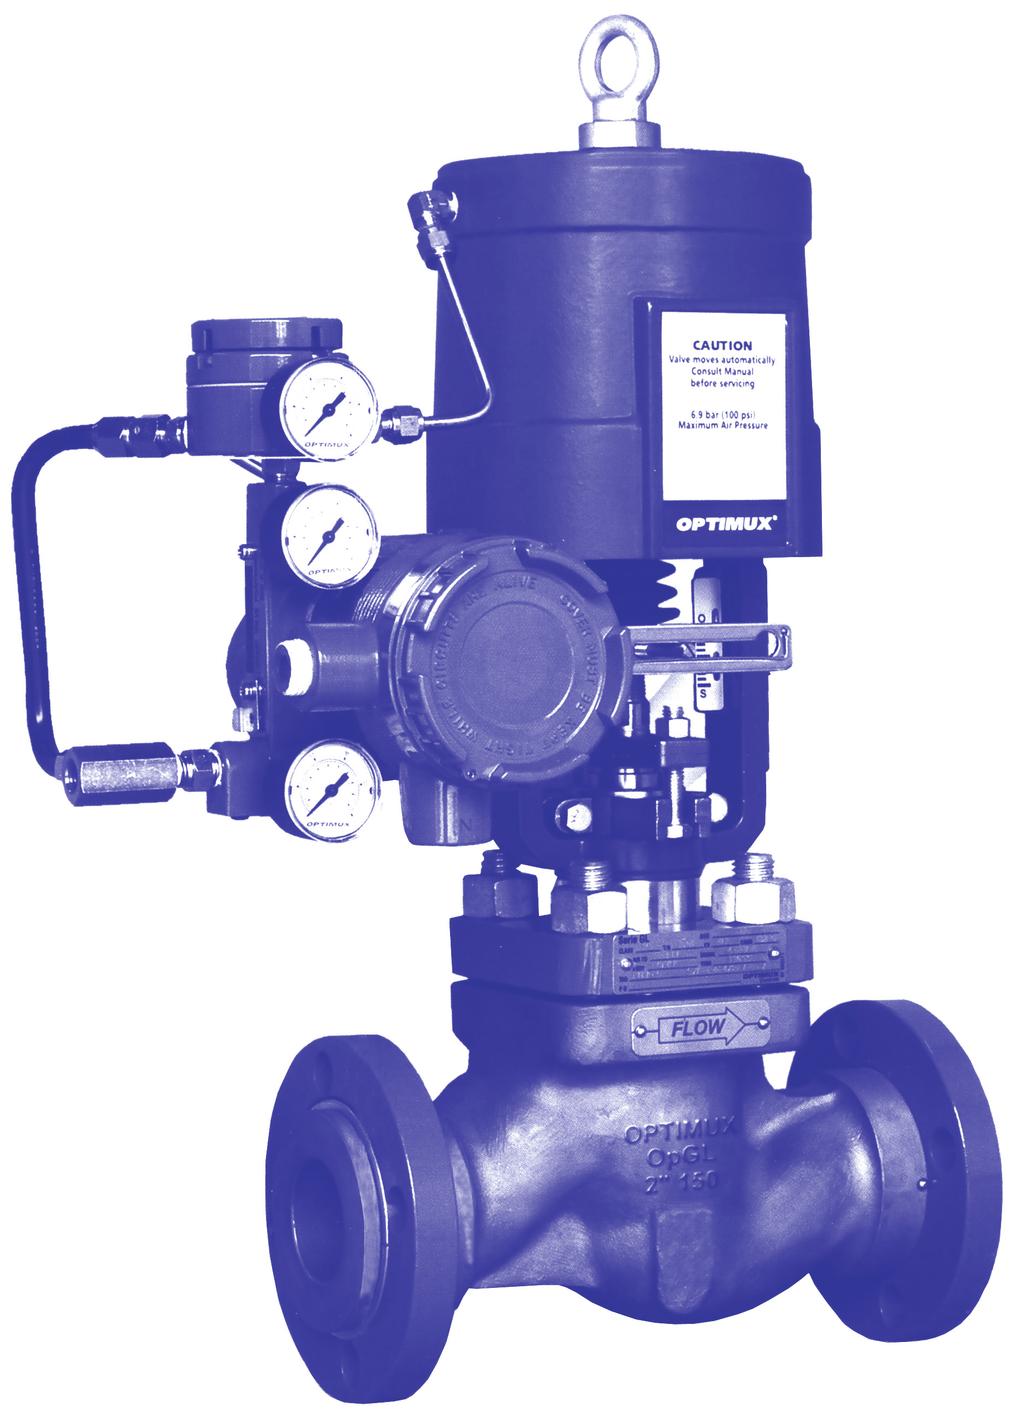 325 Op-GL - Globe The simple, reliable rugged and economical globe valve A Globe control valve with superior performance Piston-cylinder actuator Easy disassembly, including removal of bonnet and